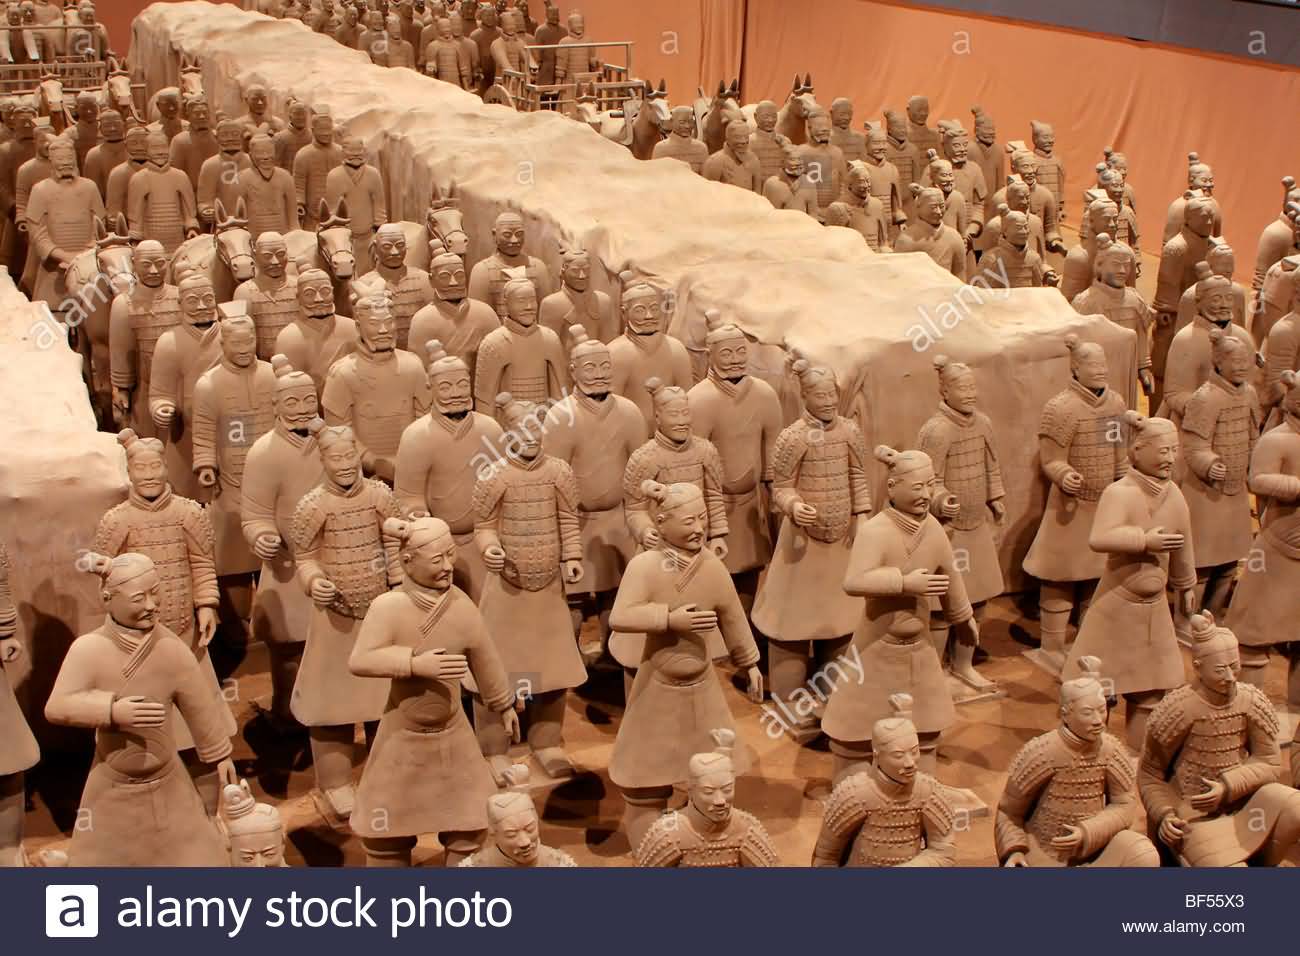 Terracotta Army Of The First Emperor Of China Quin Shi Huang di Exhibition